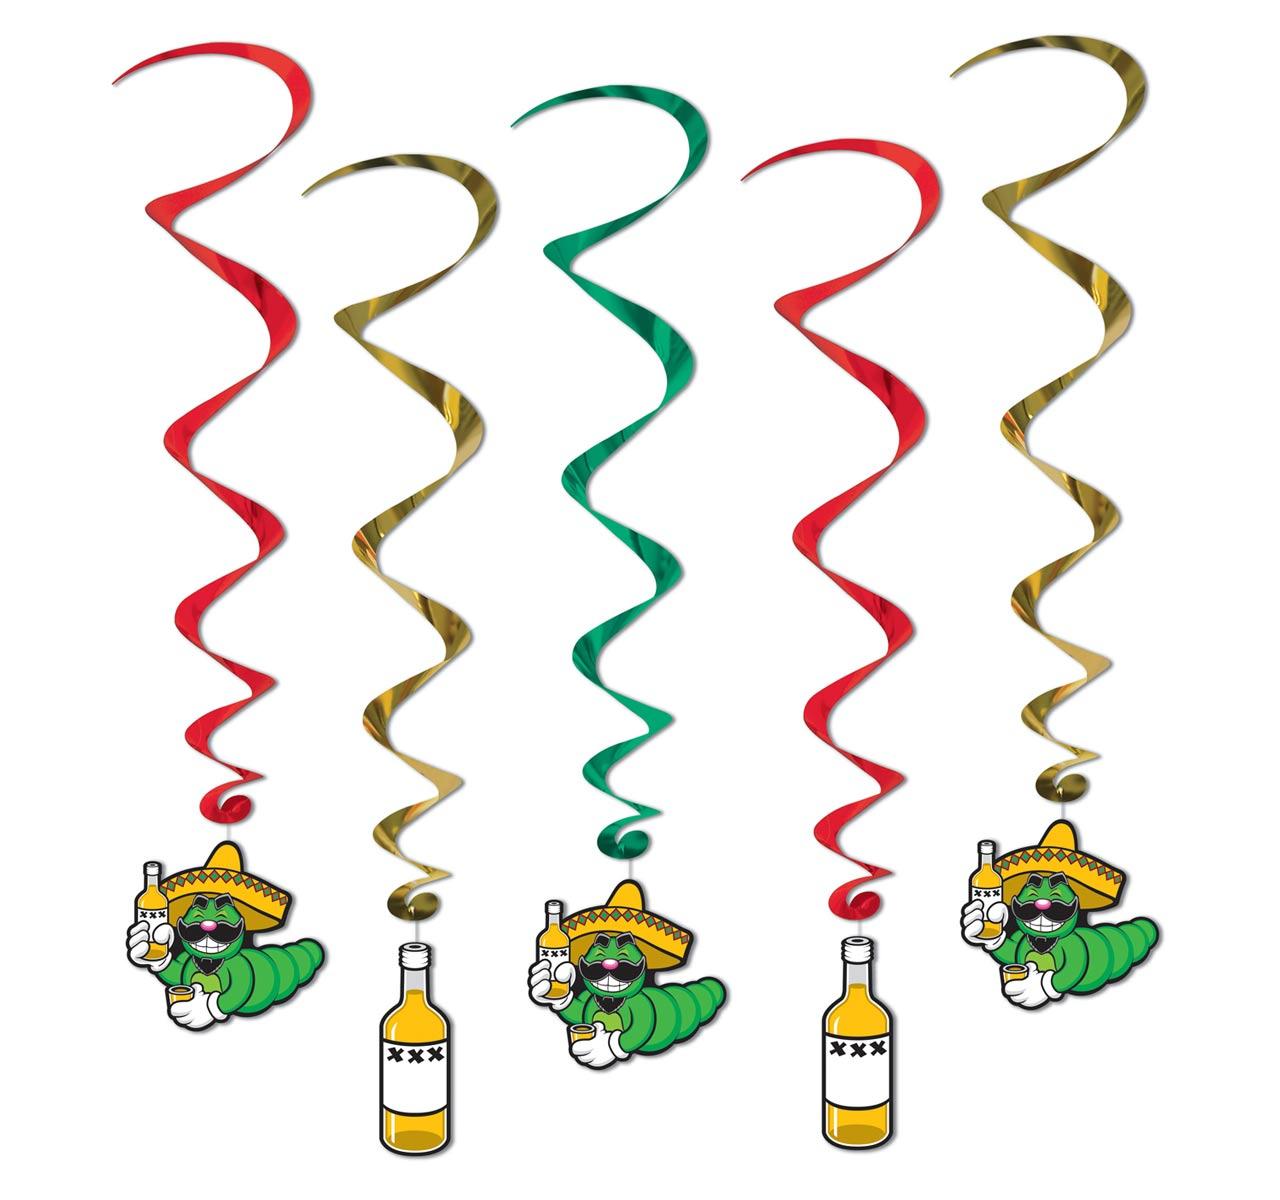 Mexican Fiesta Whirls with Tequila Bottle or Worm pk5 decorations over 3ft by Beistle 57563 and available here at Karnival Costumes online party shop